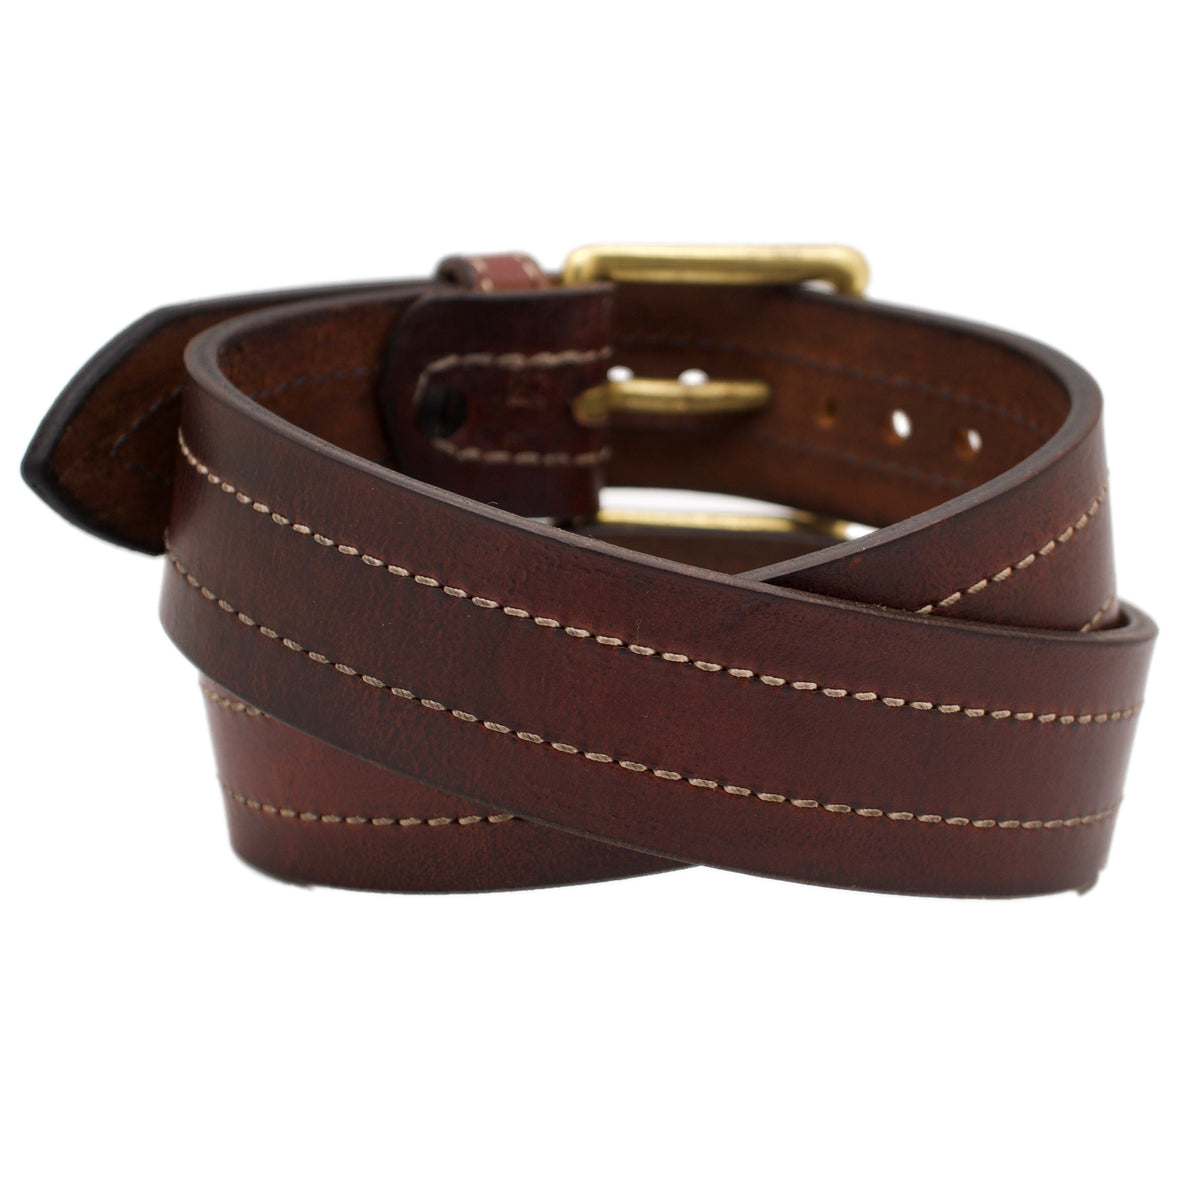 The DUTTON Wide 1.75 Leather Belt